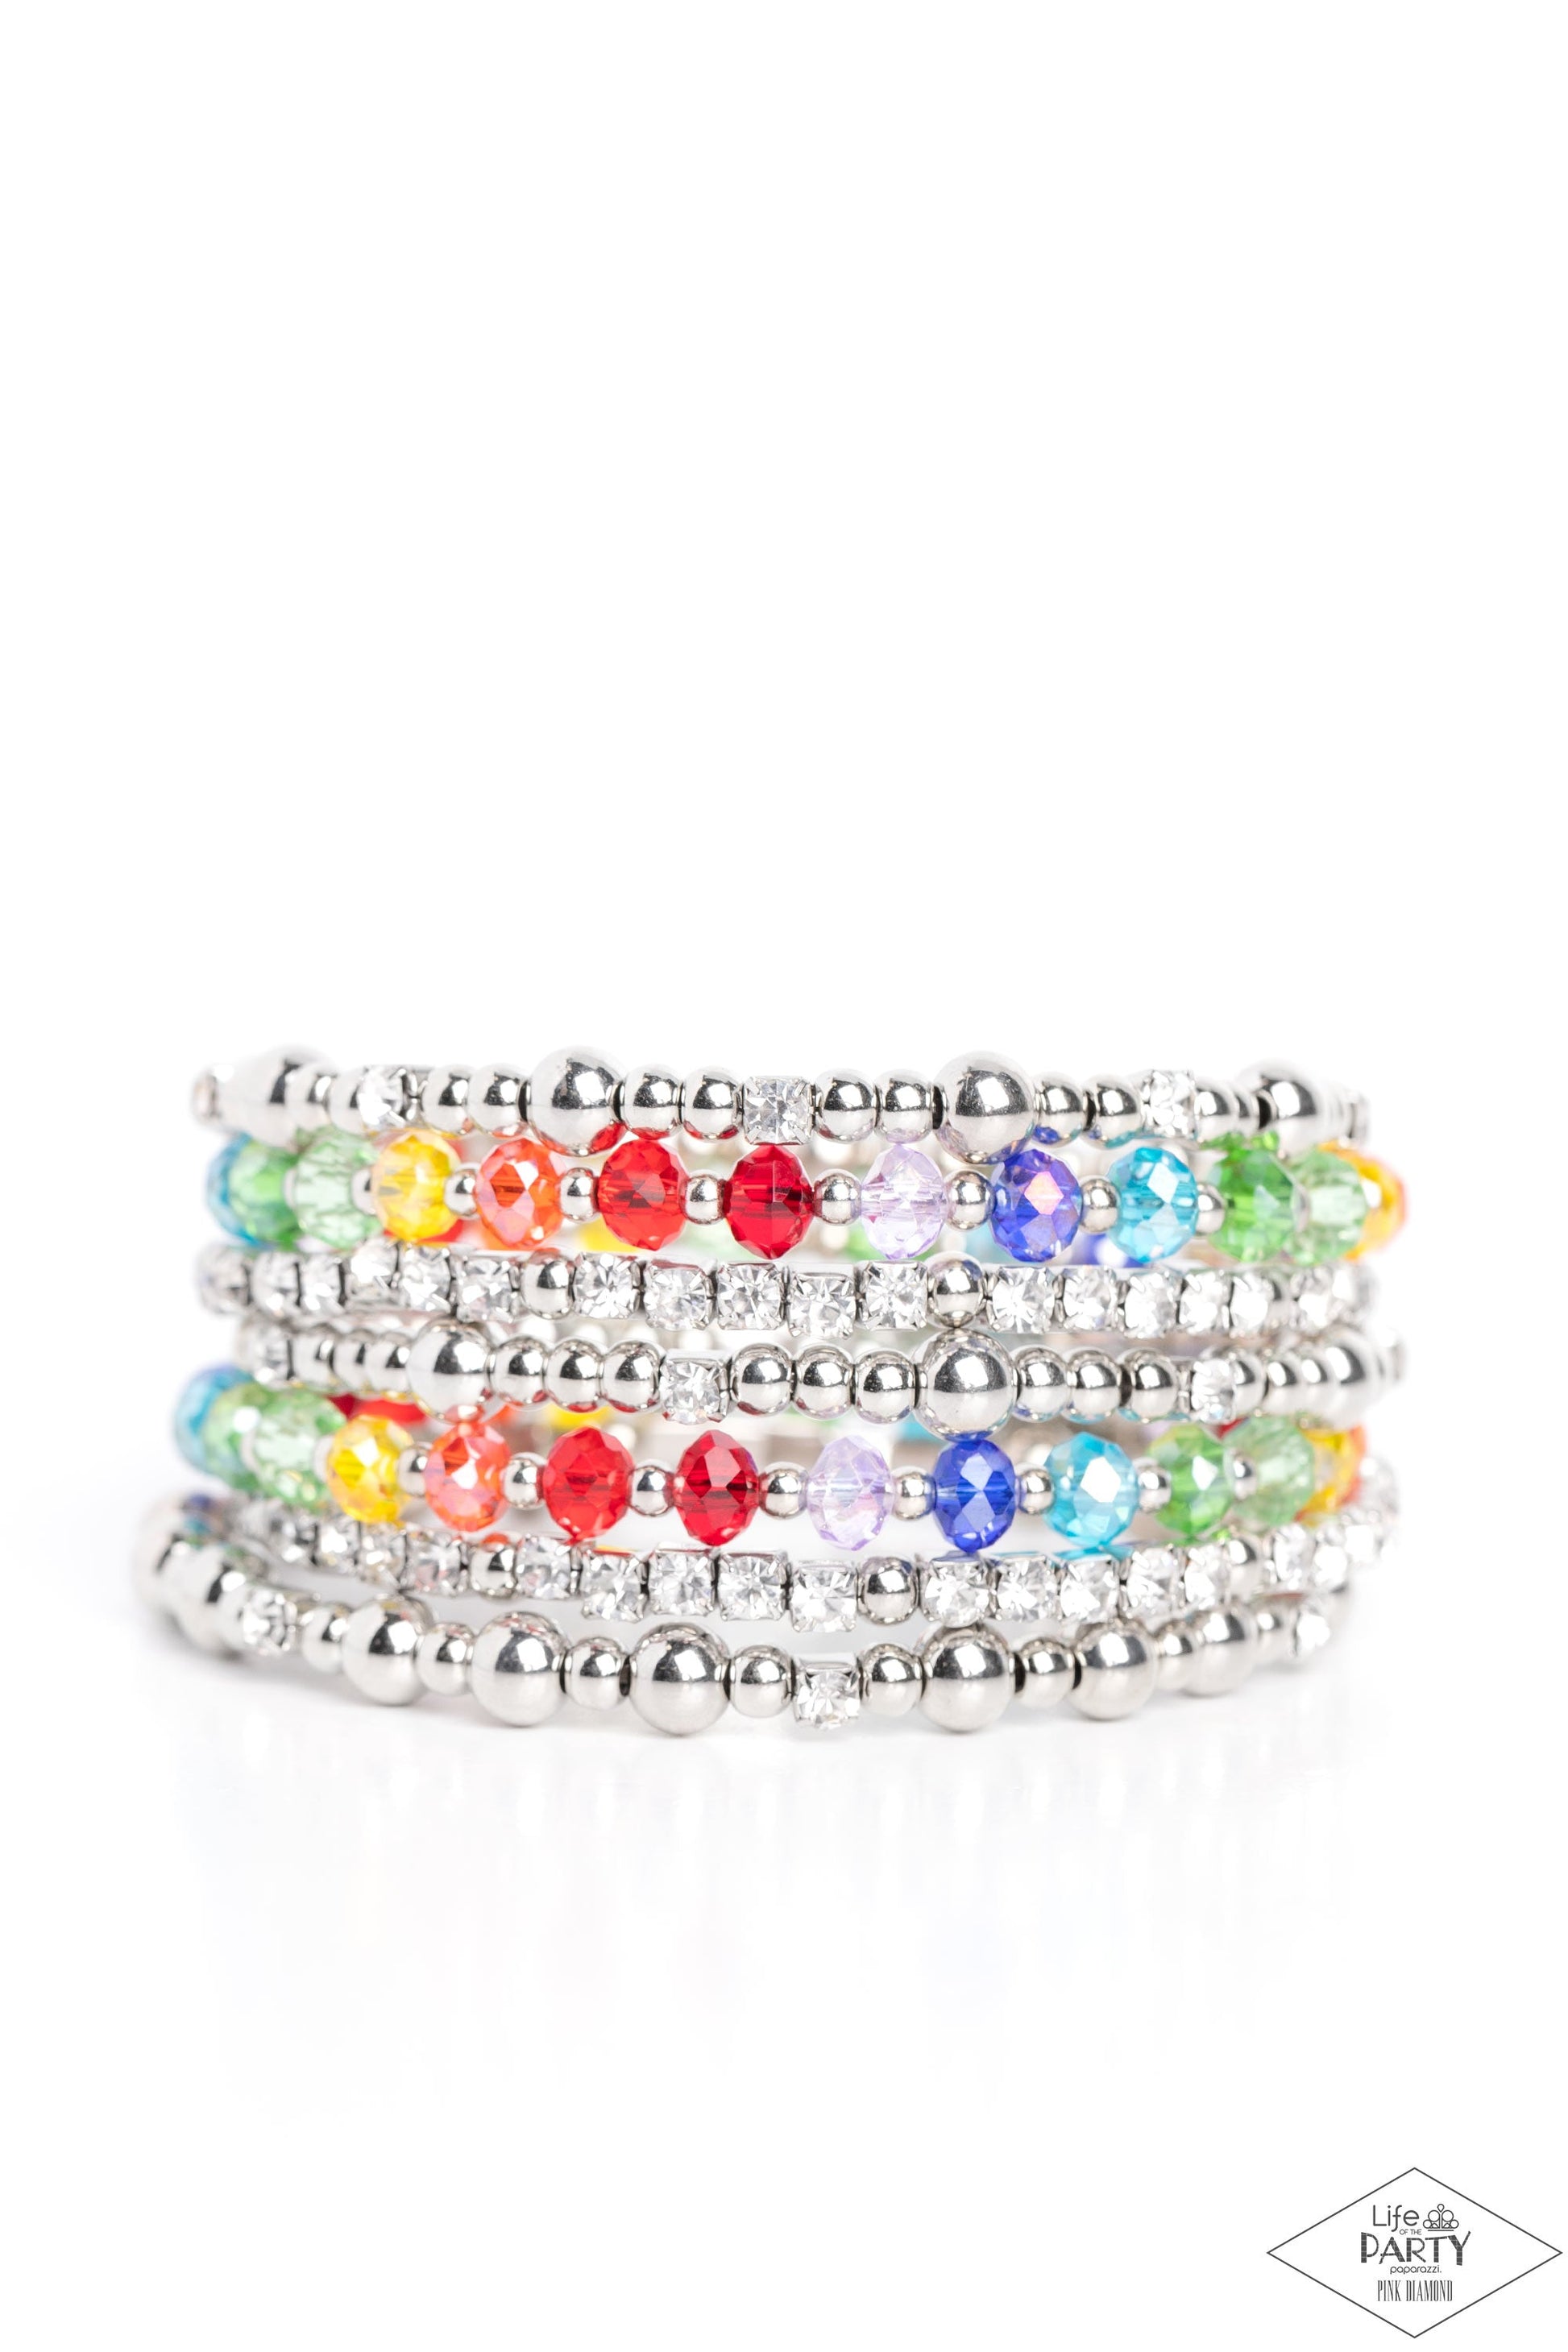 ICE Knowing You - Multi Color Coil Bracelet - Paparazzi Accessories -An icy collection of silver beads, cubes, opaque crystals in vibrant shades, and glassy white rhinestones are threaded along a coiled wire, creating a blinding infinity wrap style bracelet around the wrist. Sold as one individual bracelet. 